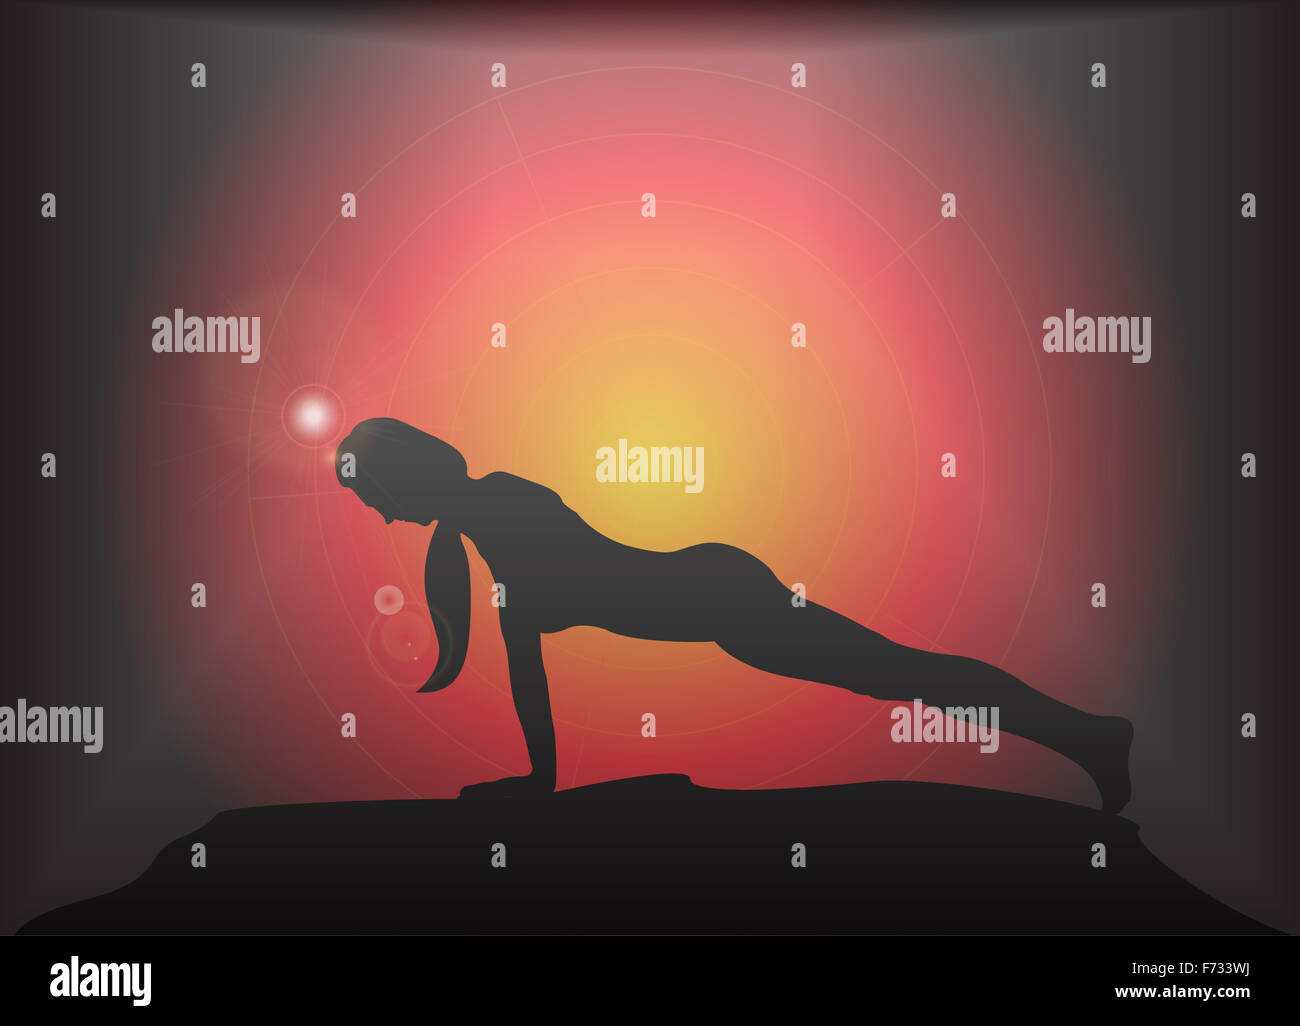 A yoga woman silhouette performing plank pose on a dark colourful background with a glare Stock Photo